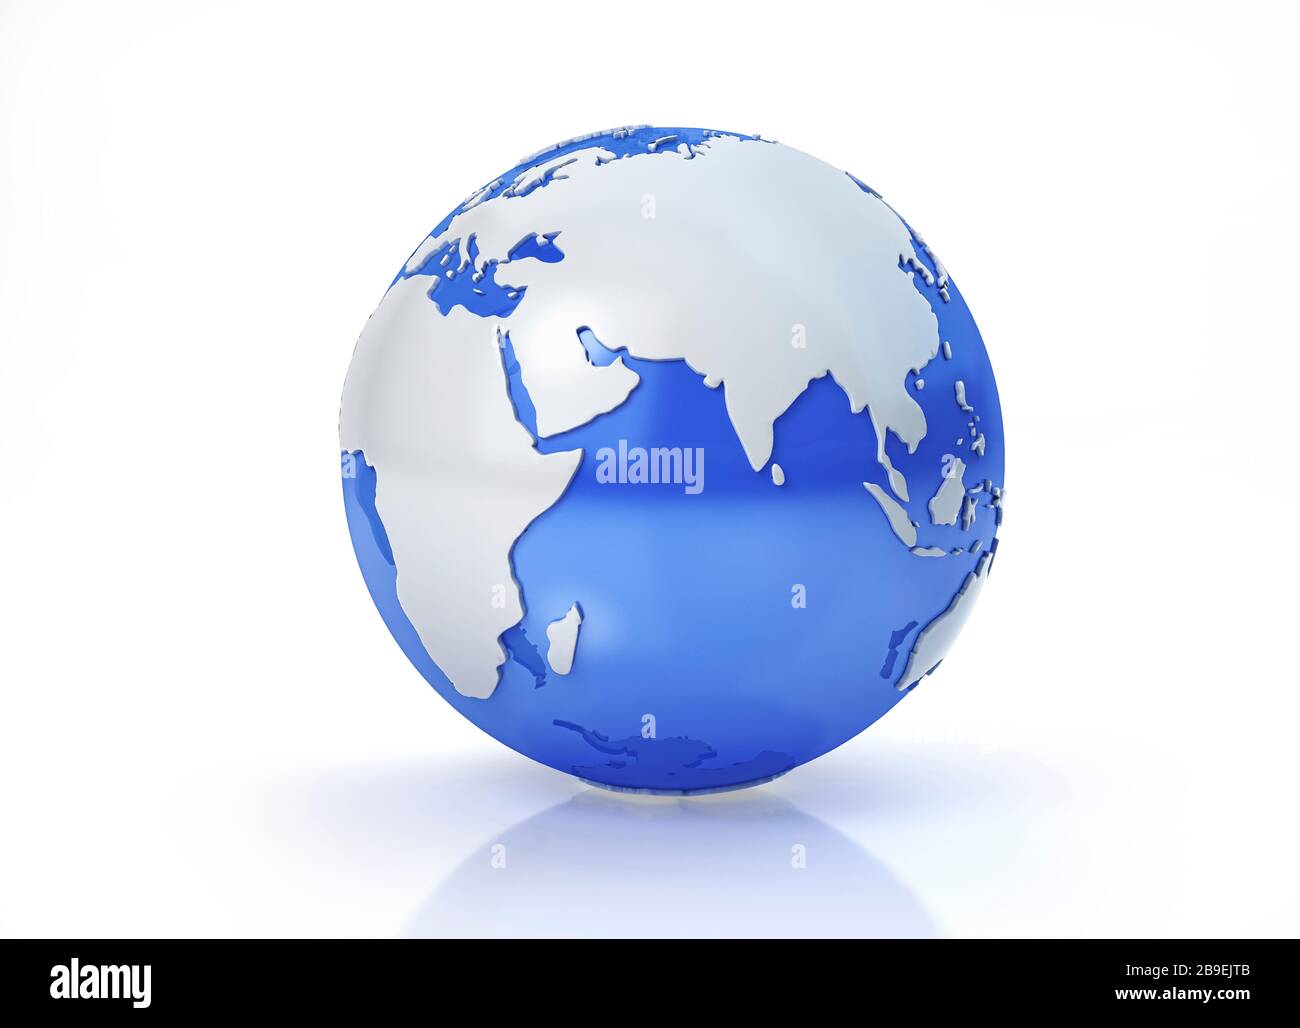 Stylized Earth globe, Asia view with grey continents. Stock Photo